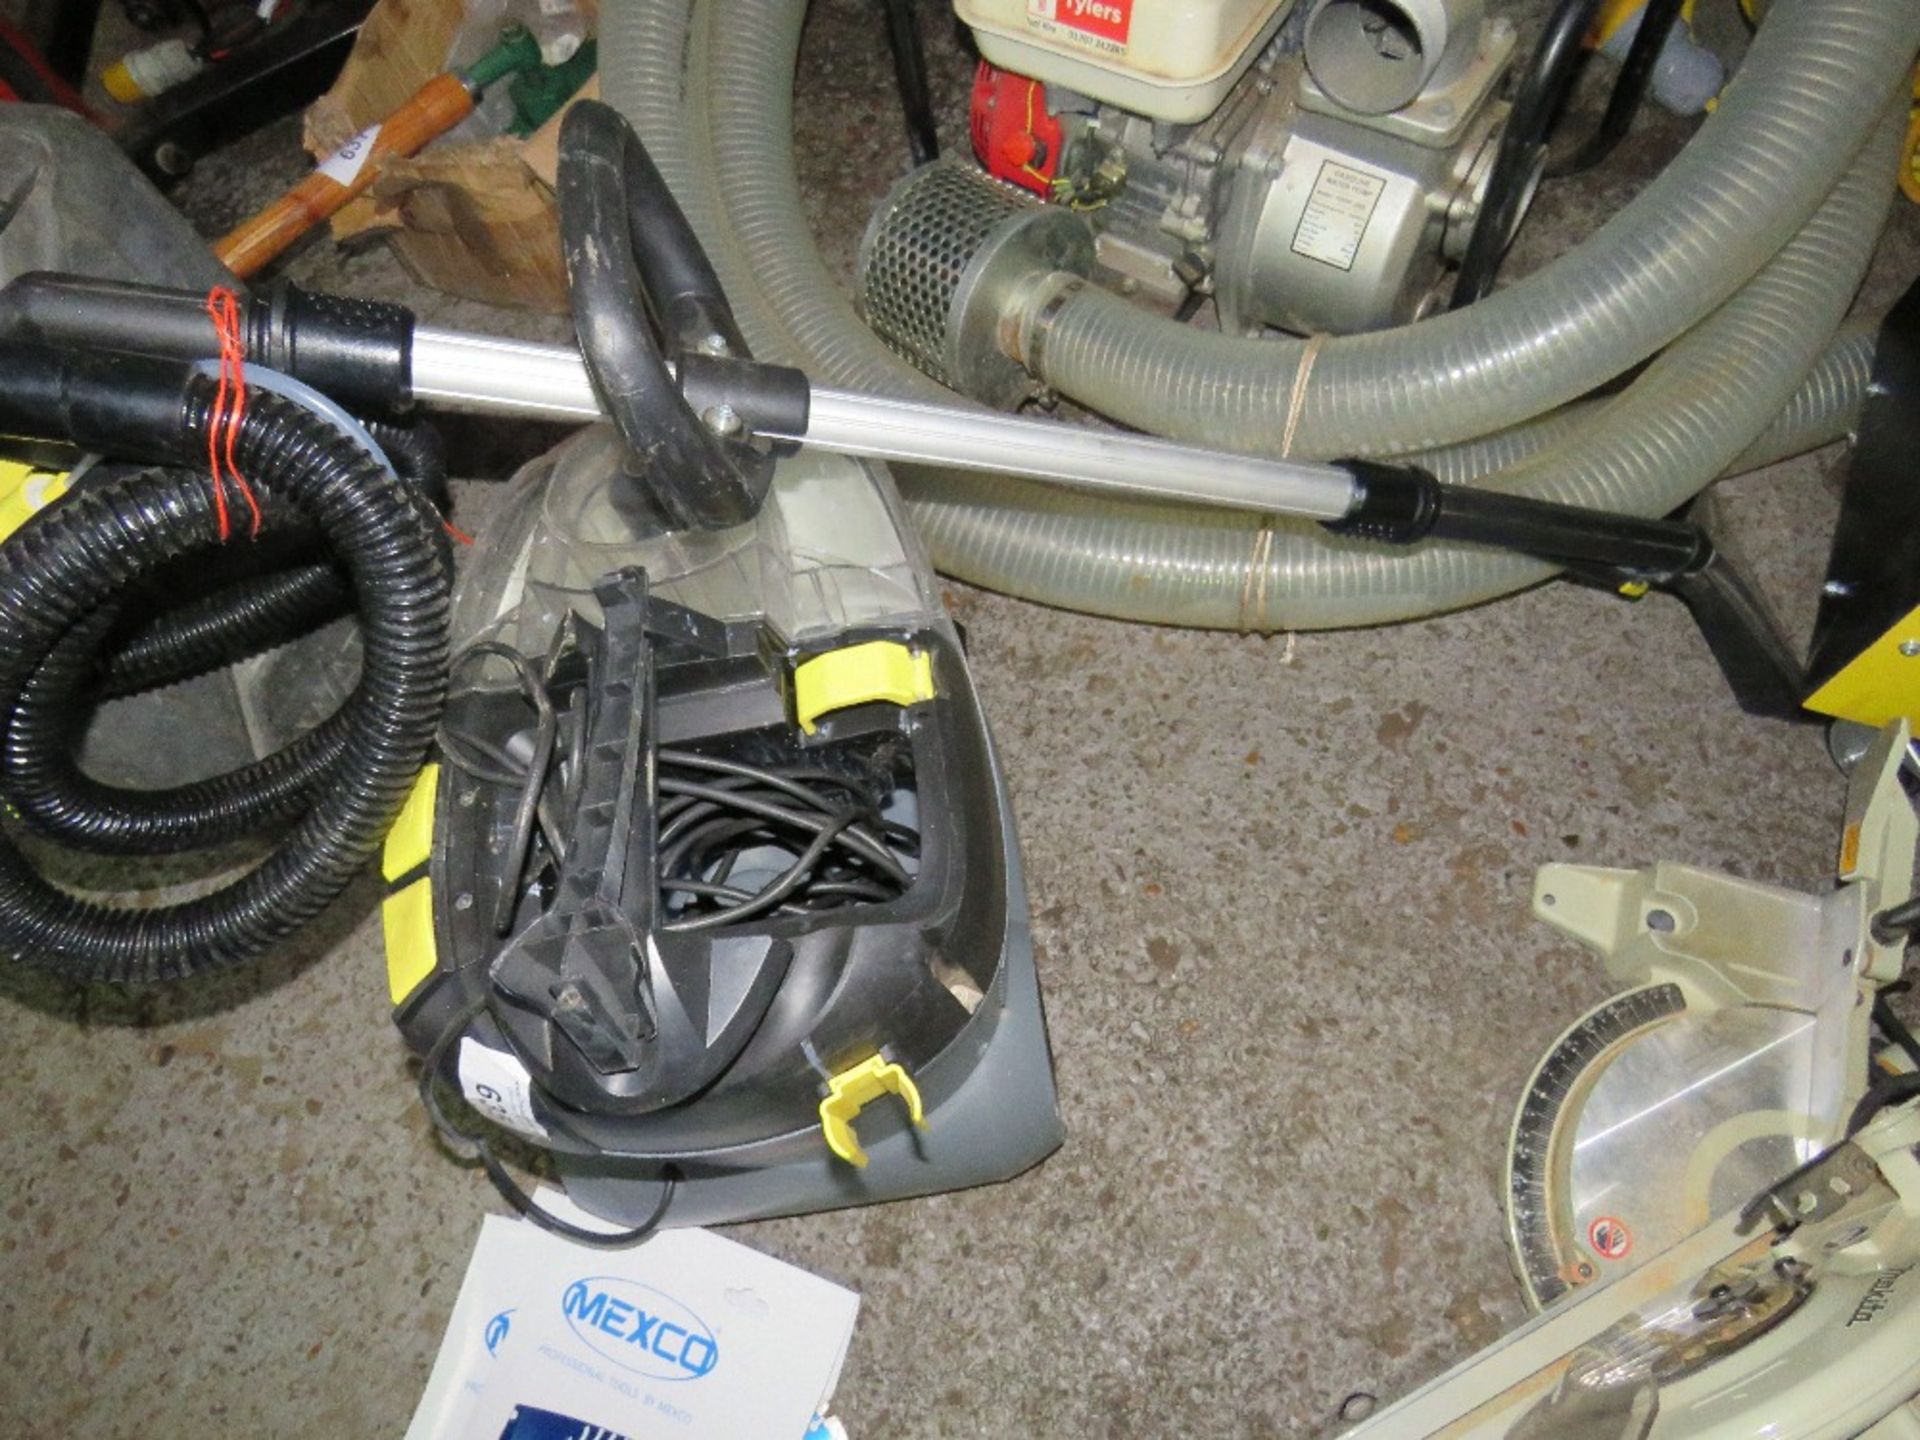 KARCHER 240VOLT CARPET CLEANER . DIRECT FROM LOCAL COMPANY DUE TO THE CLOSURE OF THE SMALL PLANT SE - Image 3 of 3